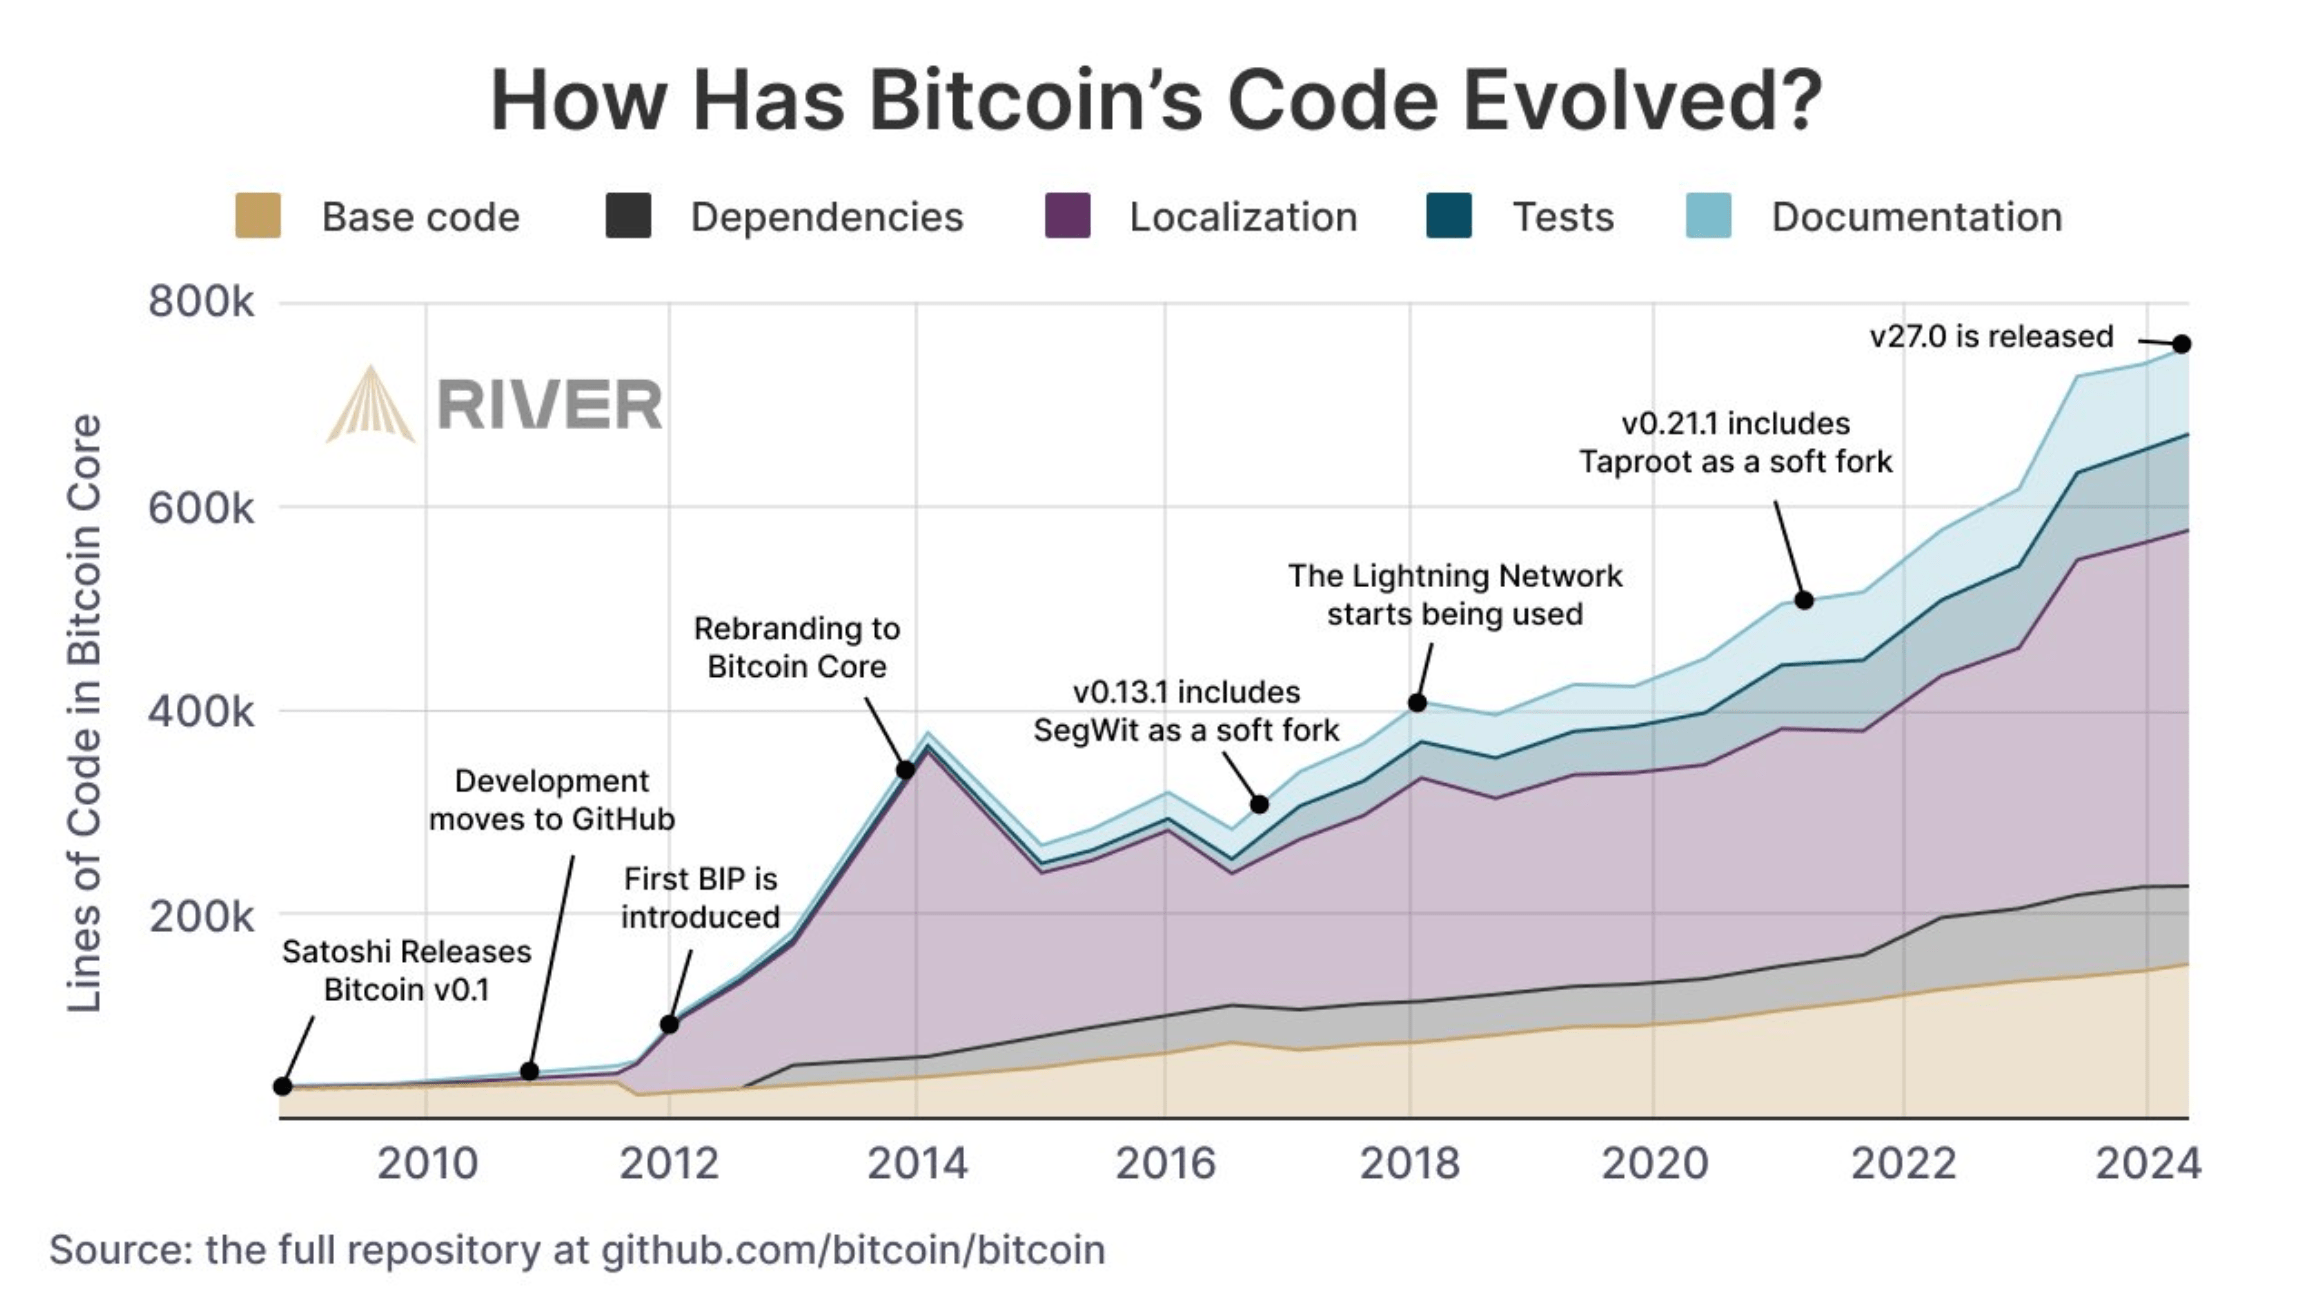 The evolution of Bitcoin’s code from 2009 to 2024 shows growth in base code, dependencies, localization, tests, and documentation. Key milestones include GitHub migration, SegWit and Taproot updates, and Lightning Network usage.